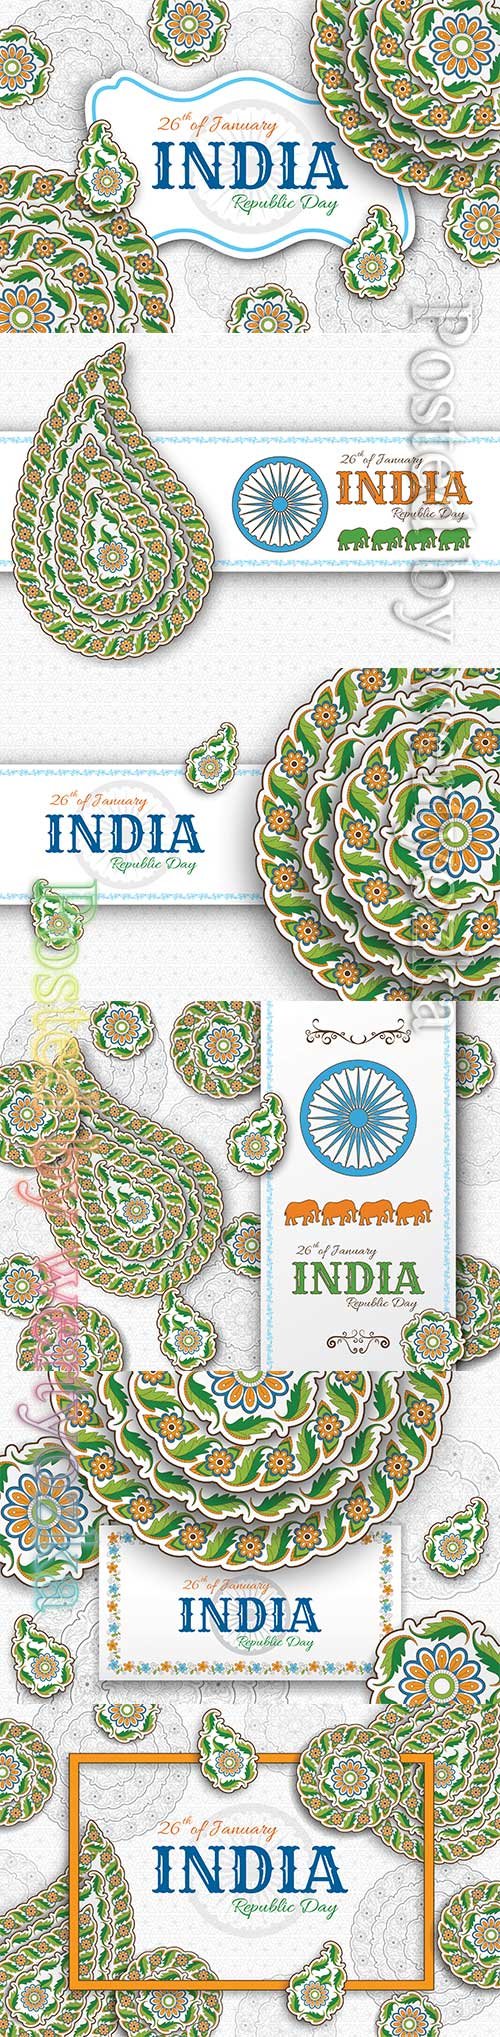 Indian Republic Day background with paisley and mandala